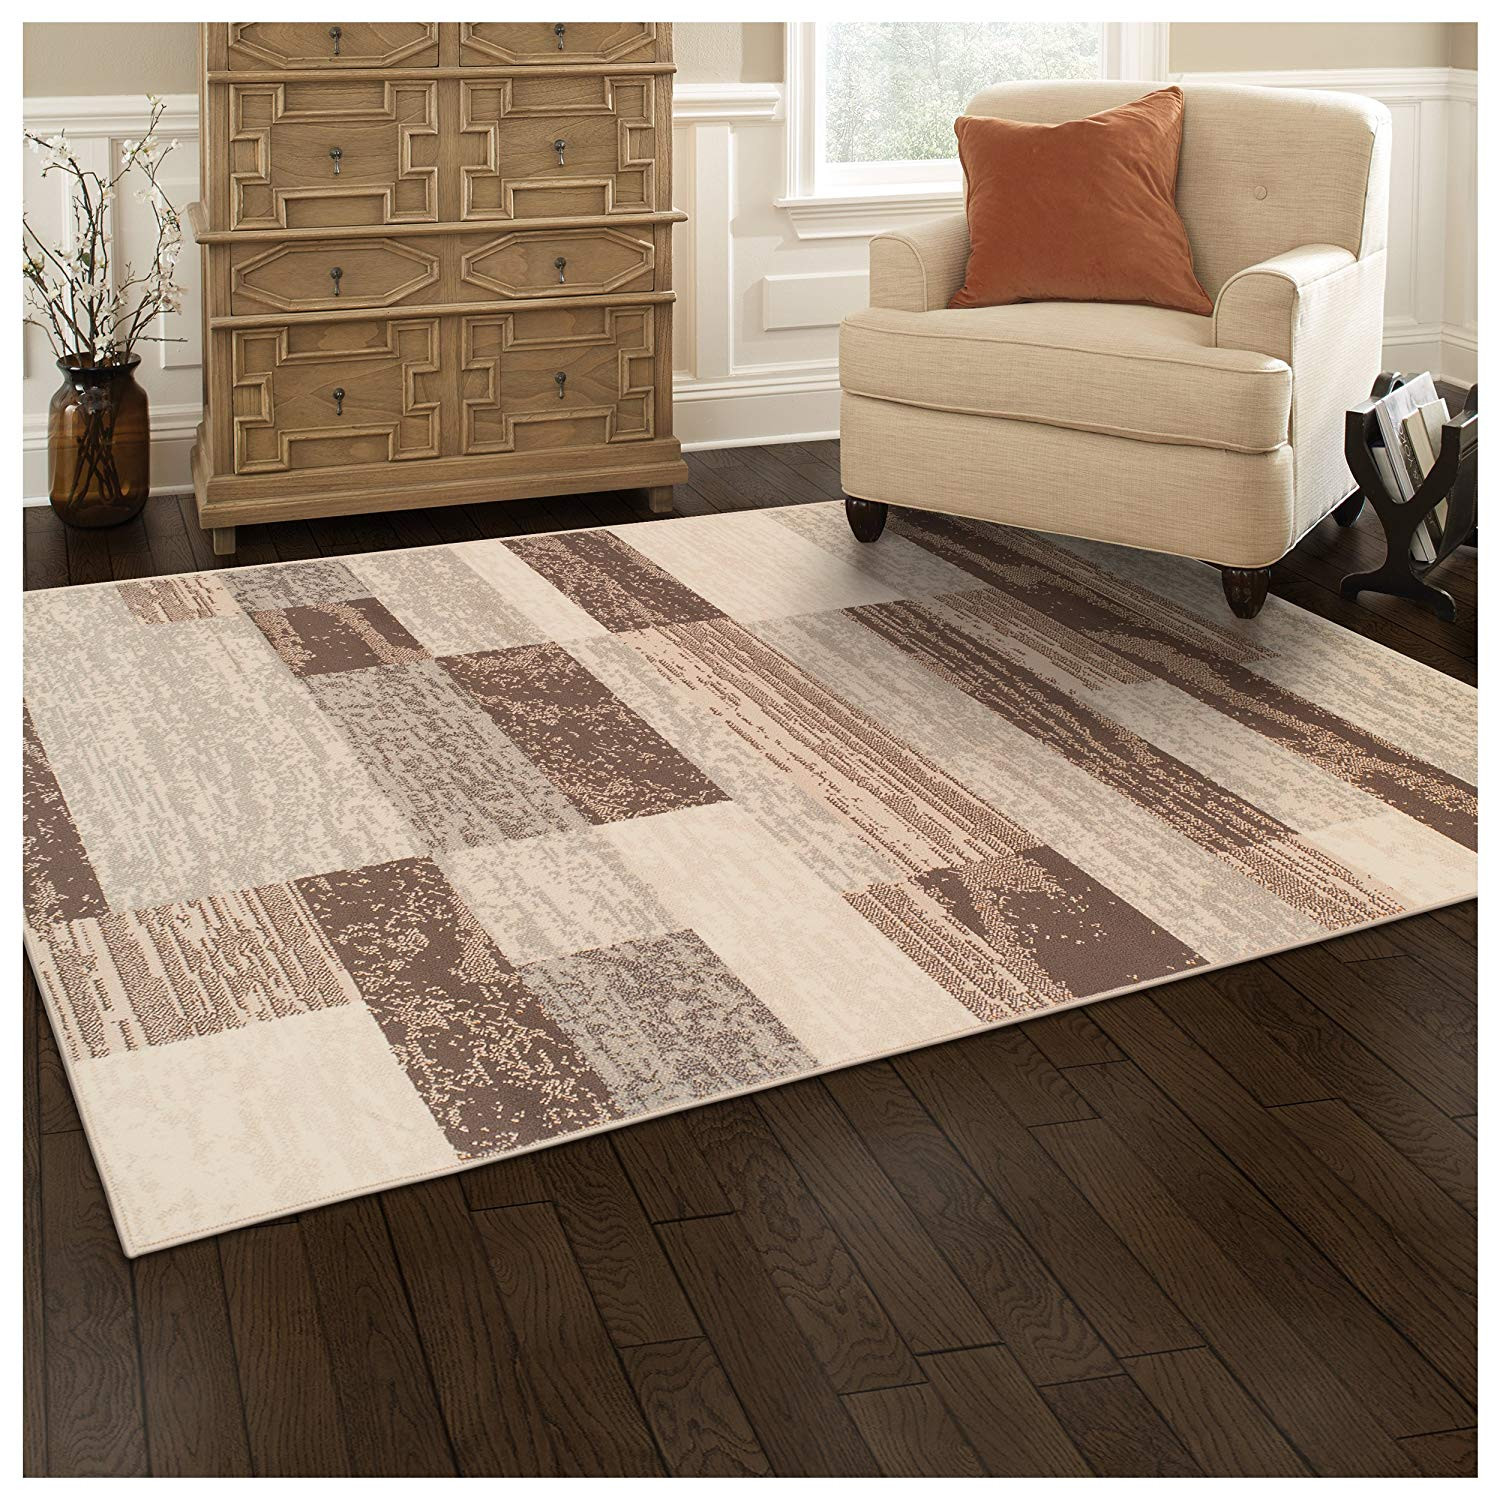 26 Perfect Superior Hardwood Flooring Rockwood Ontario 2022 free download superior hardwood flooring rockwood ontario of amazon com superior modern rockwood collection area rug 8mm pile intended for amazon com superior modern rockwood collection area rug 8mm pile 